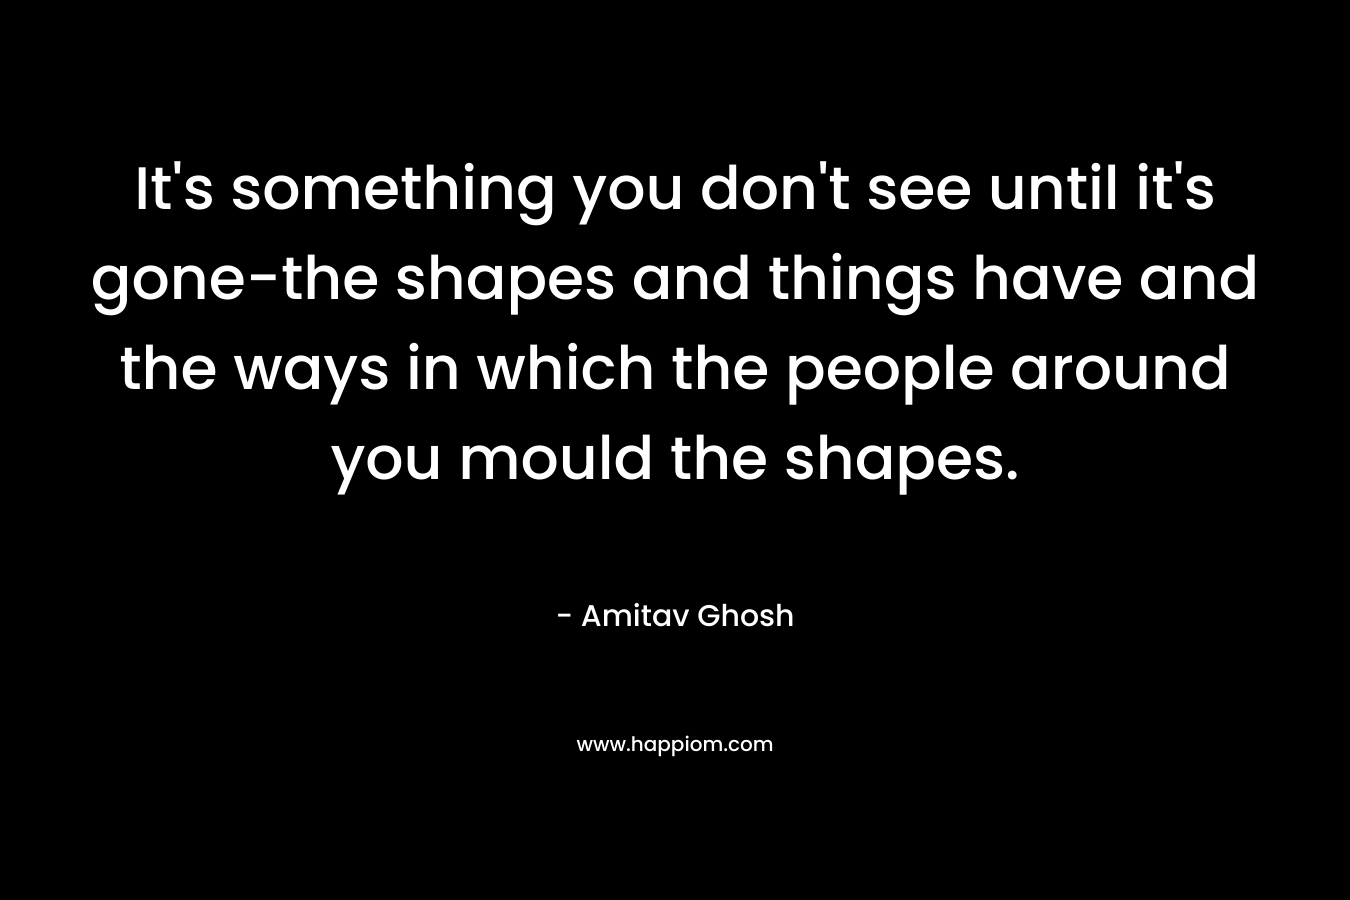 It’s something you don’t see until it’s gone-the shapes and things have and the ways in which the people around you mould the shapes. – Amitav Ghosh